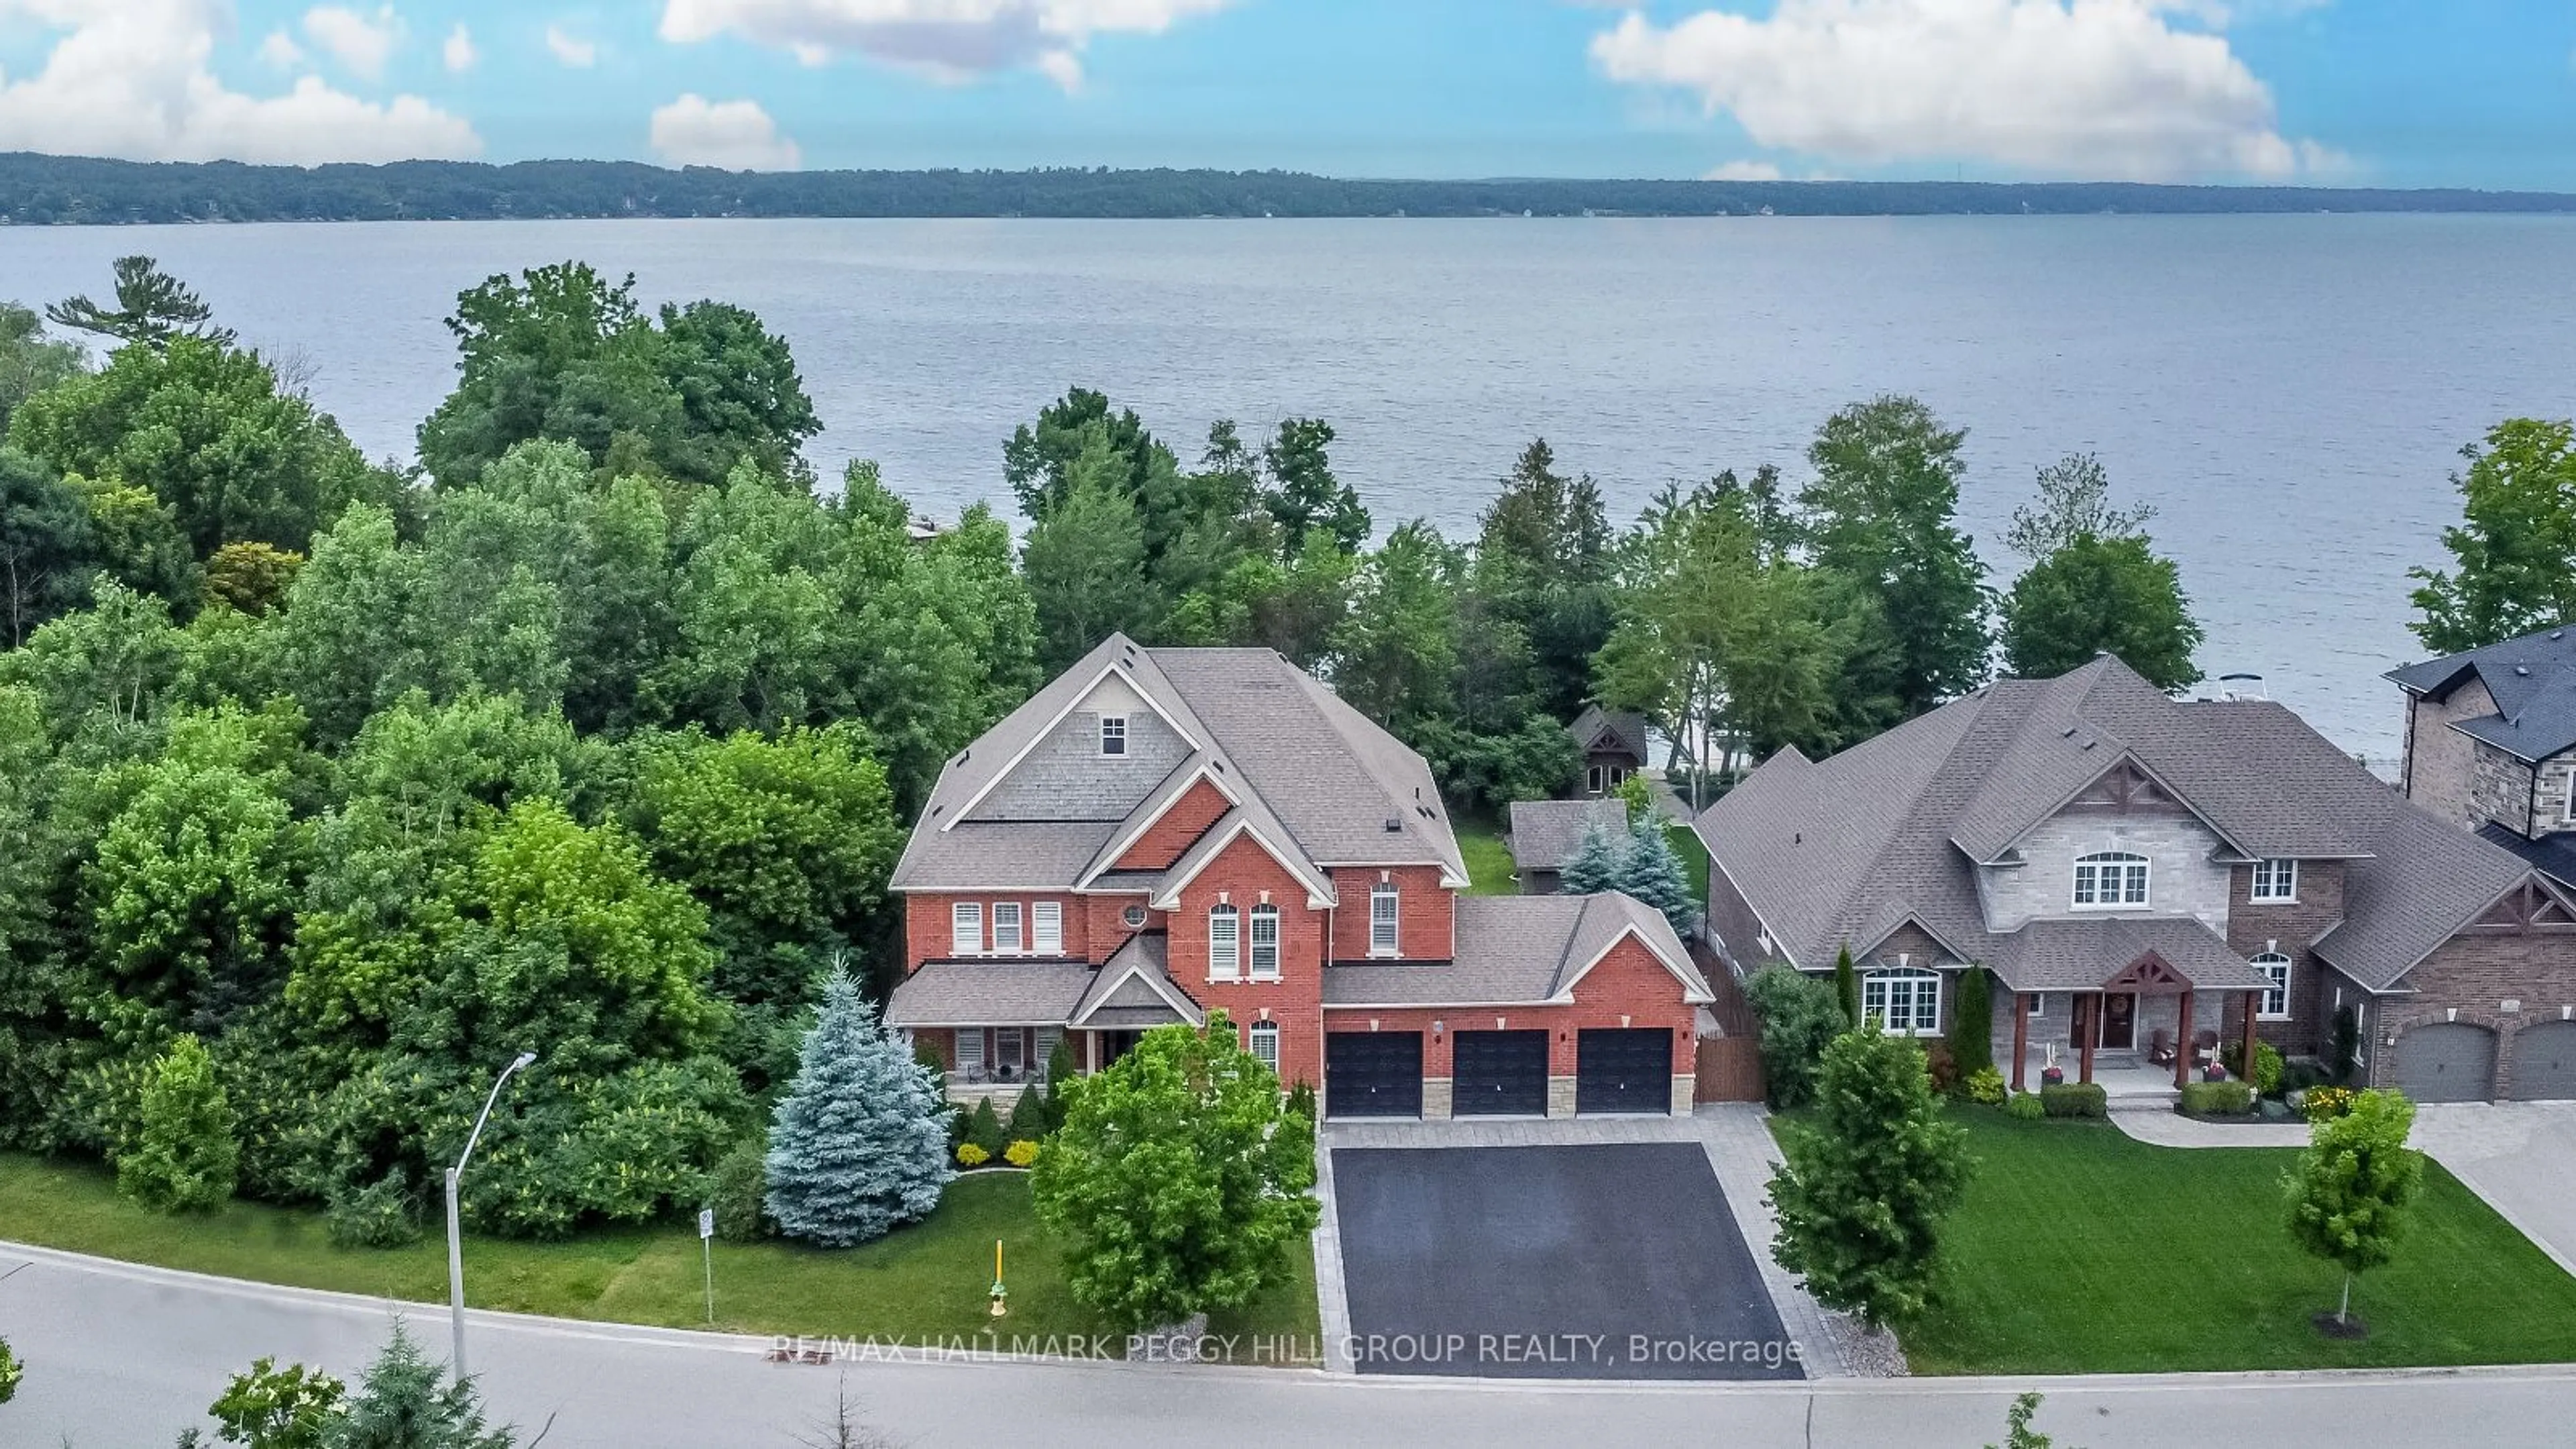 Lakeview for 31 Plunkett Crt, Barrie Ontario L4N 6M3